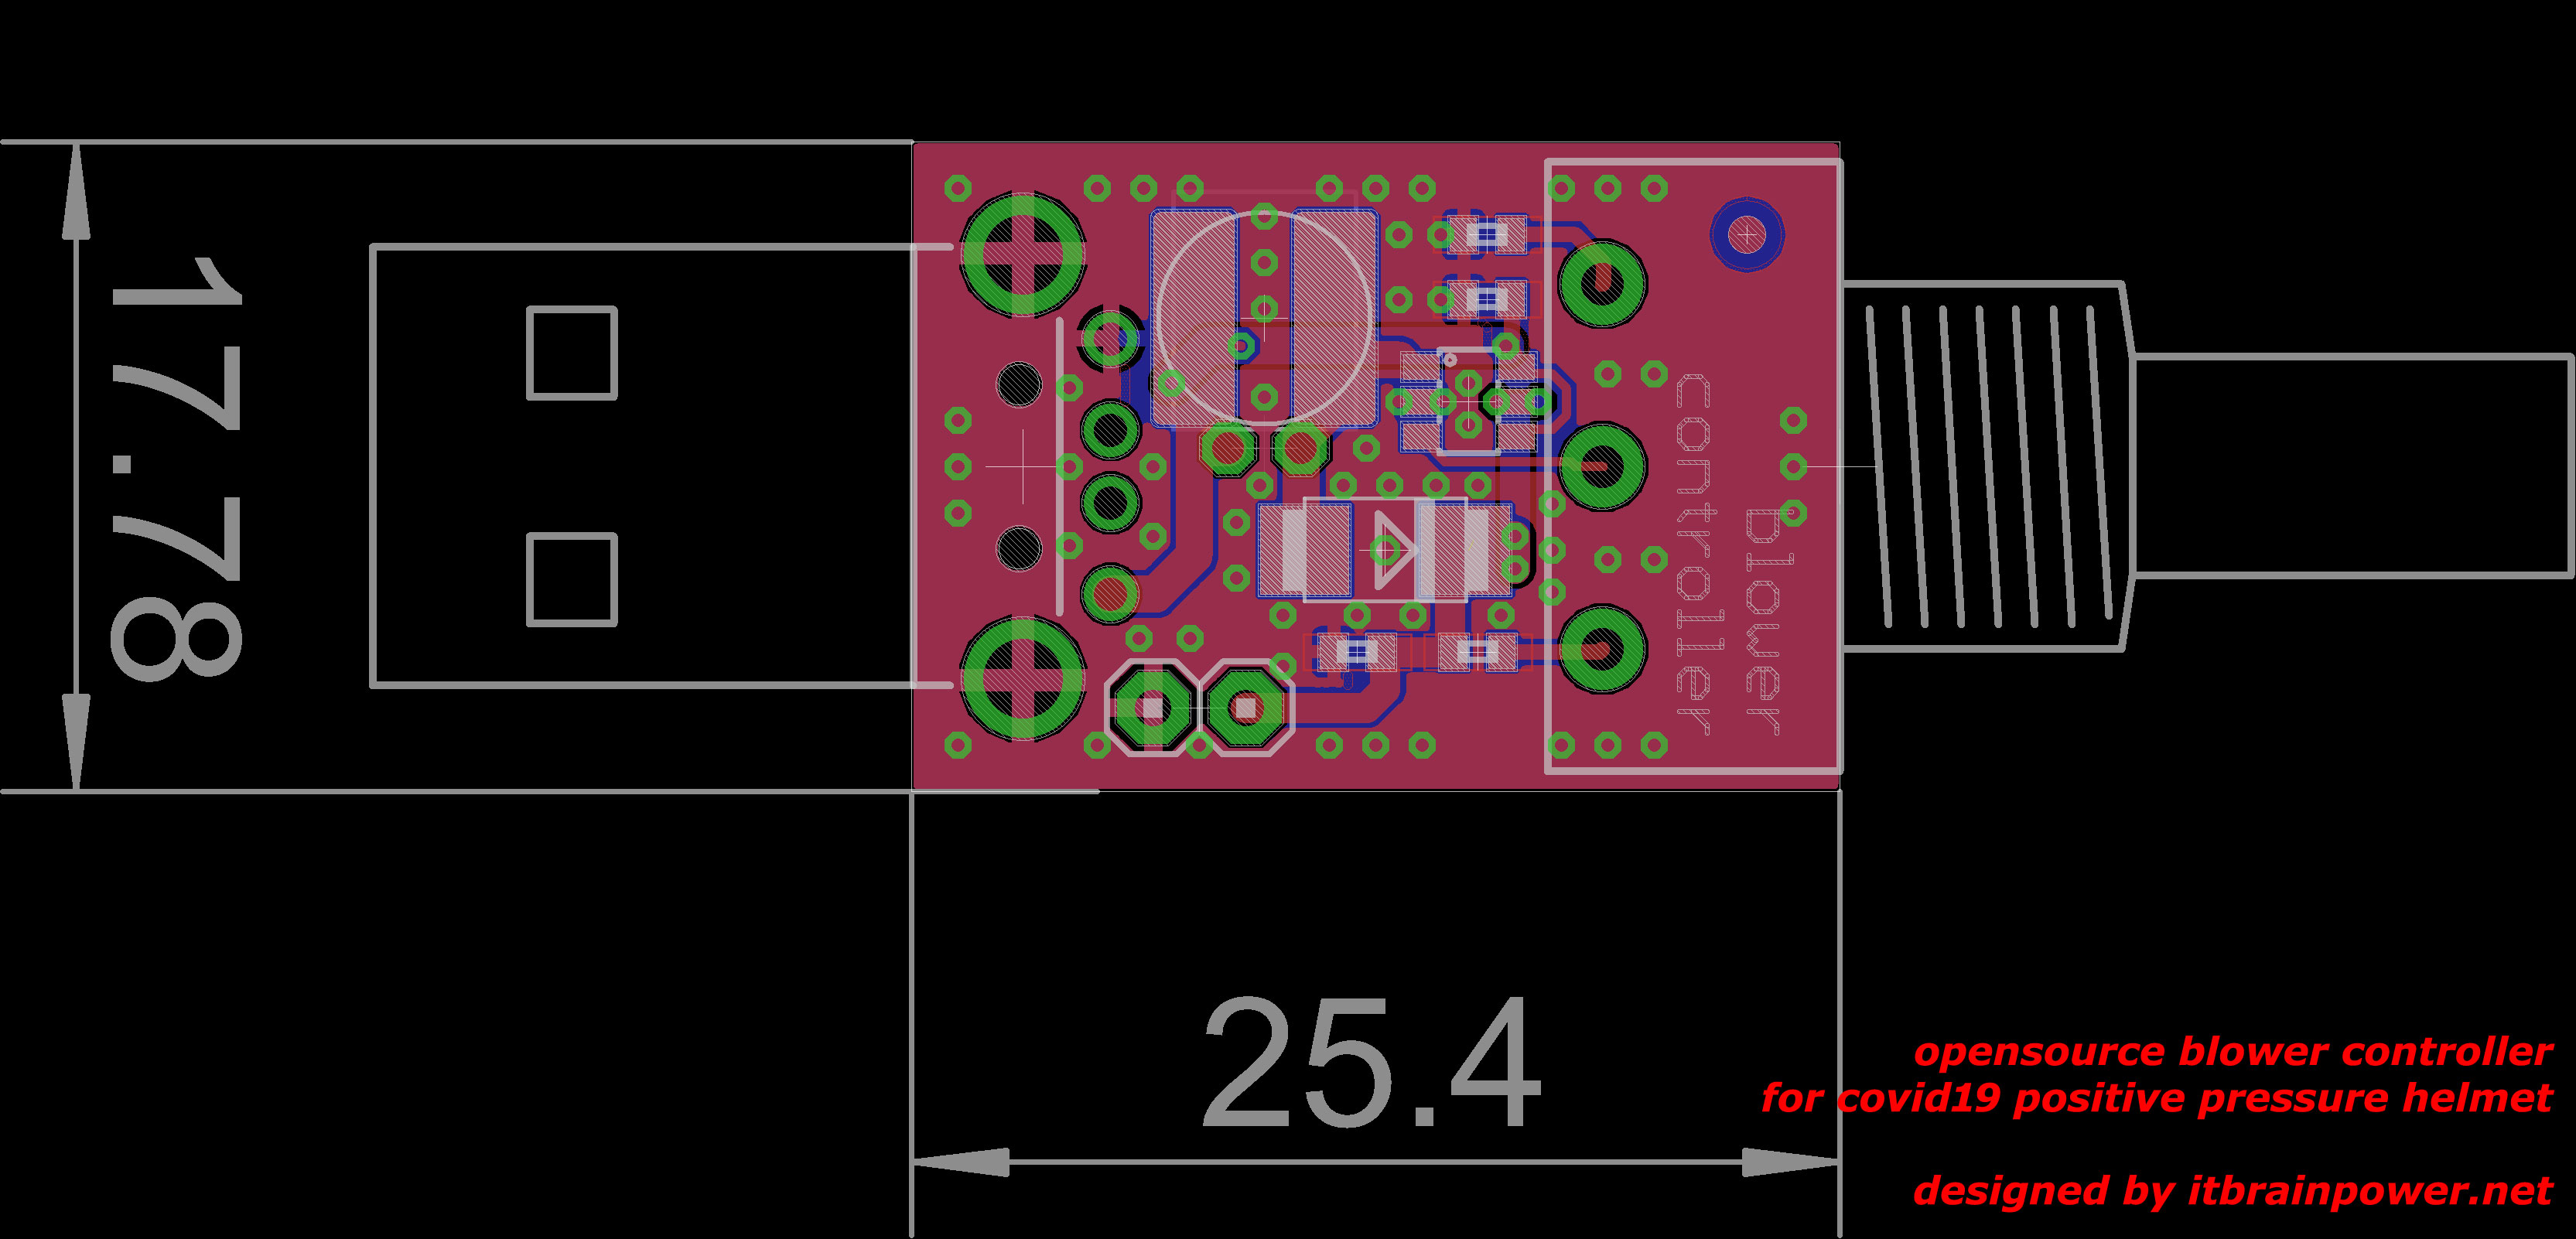 blower controller for covid19 PAPR, PCB v 0.2